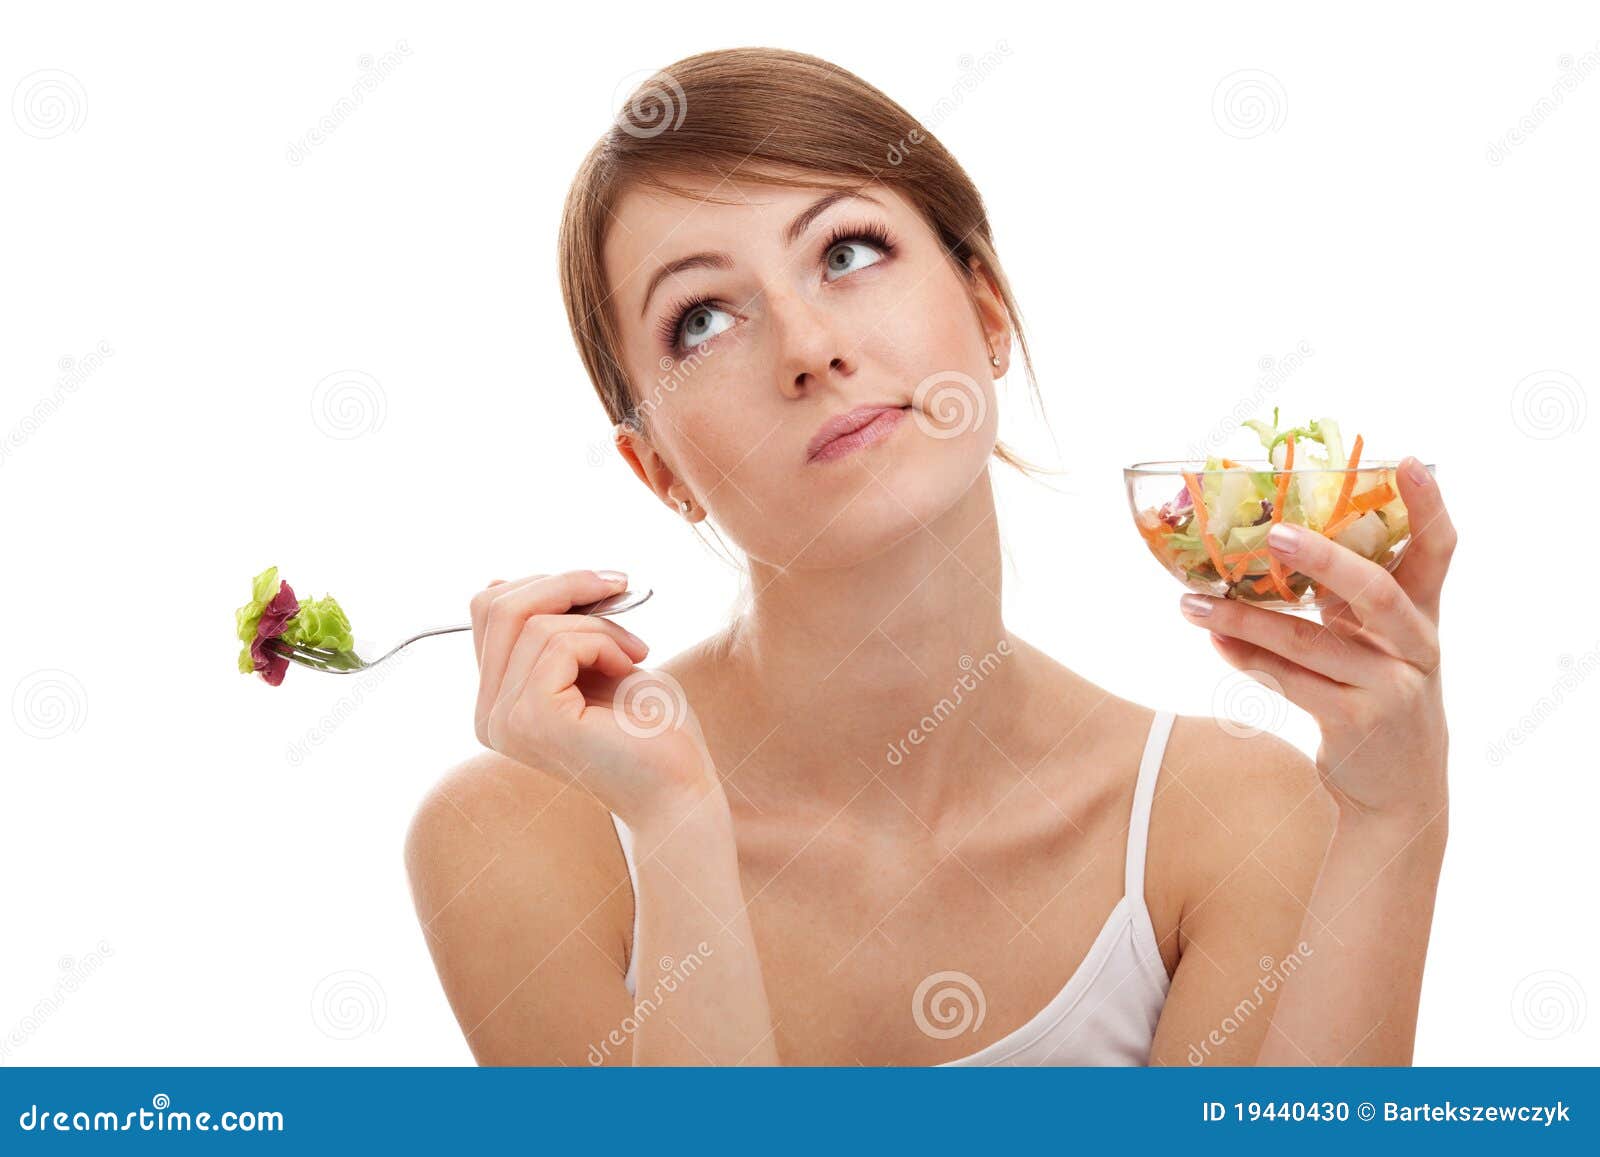 sad woman on diet with vegetables